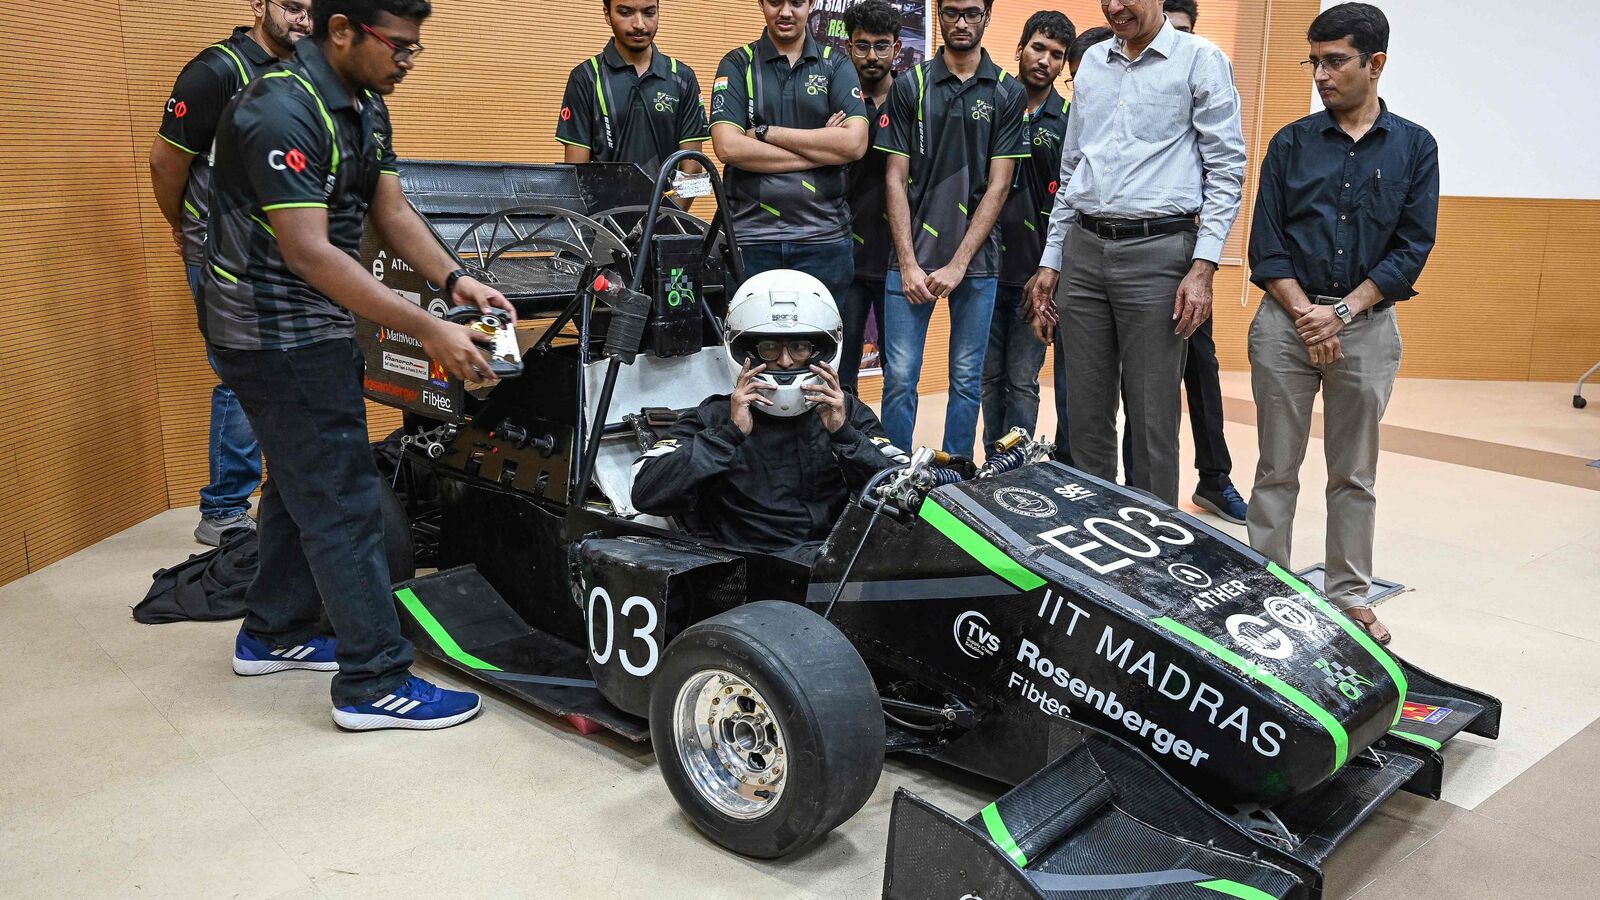 IIT Madras set to launch Masters Programme in electric vehicles